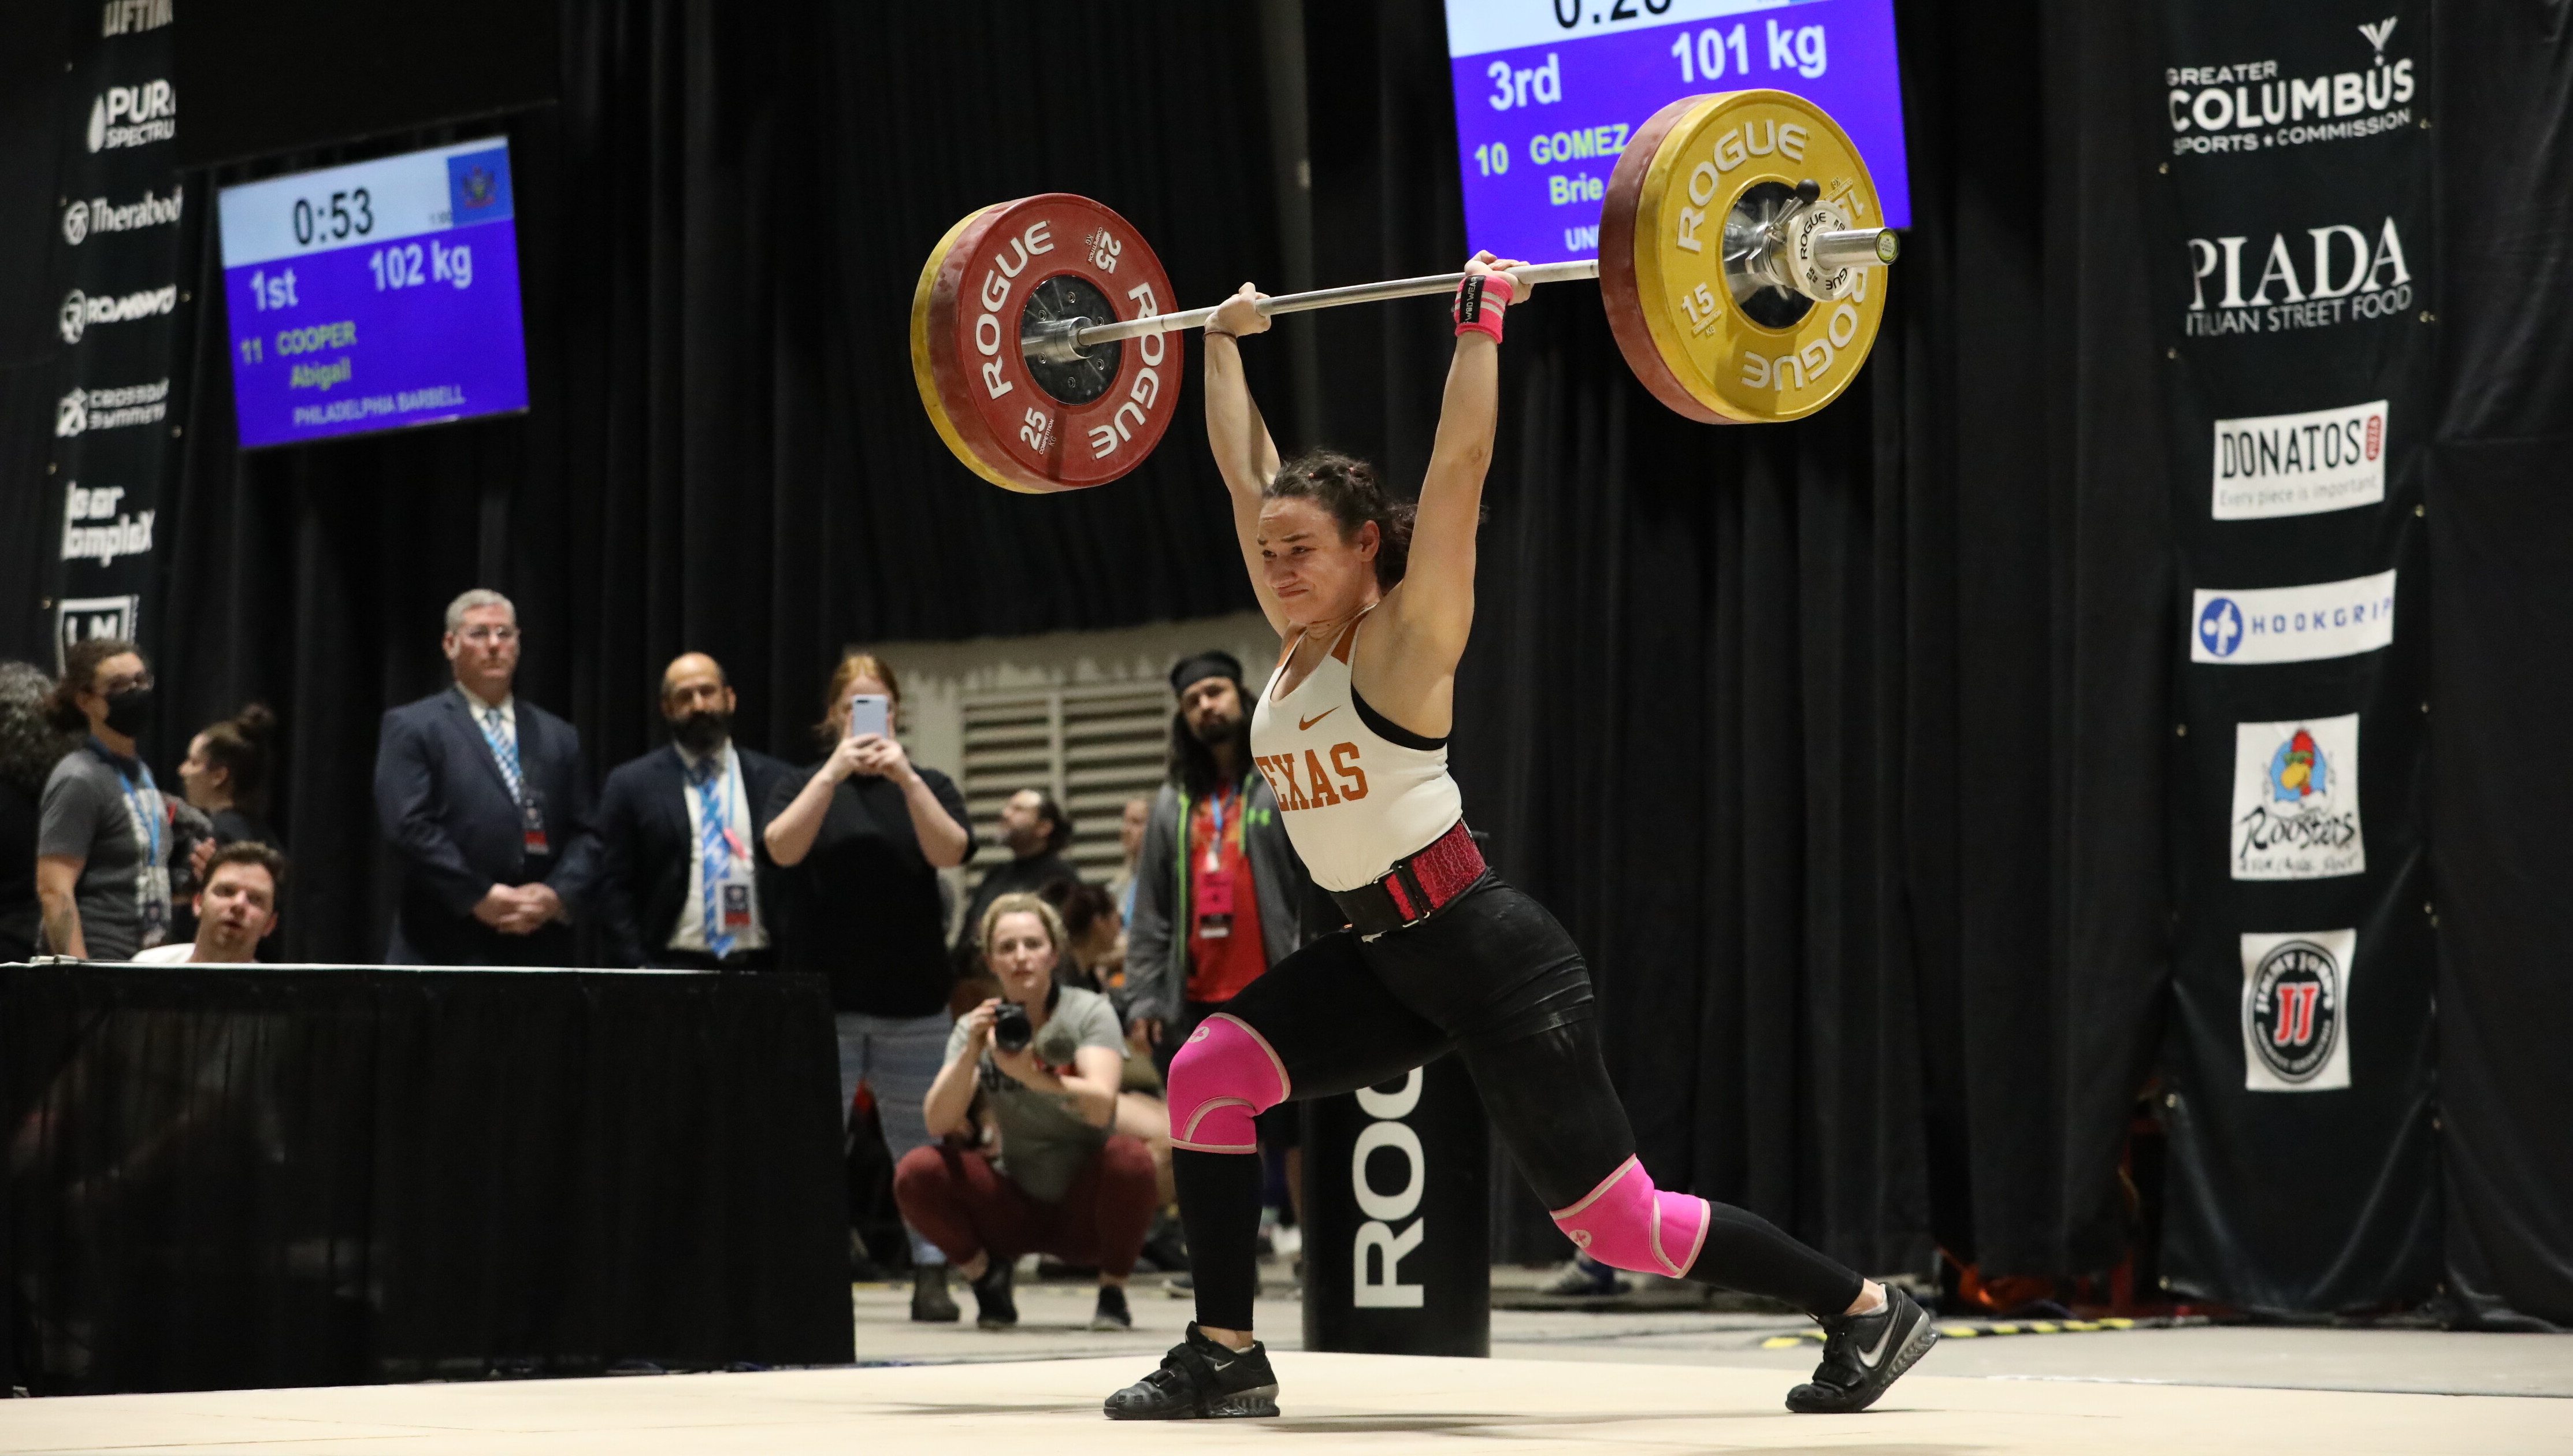 Brie clean & jerks a PR 101kg to take silver at 2022 Universities.